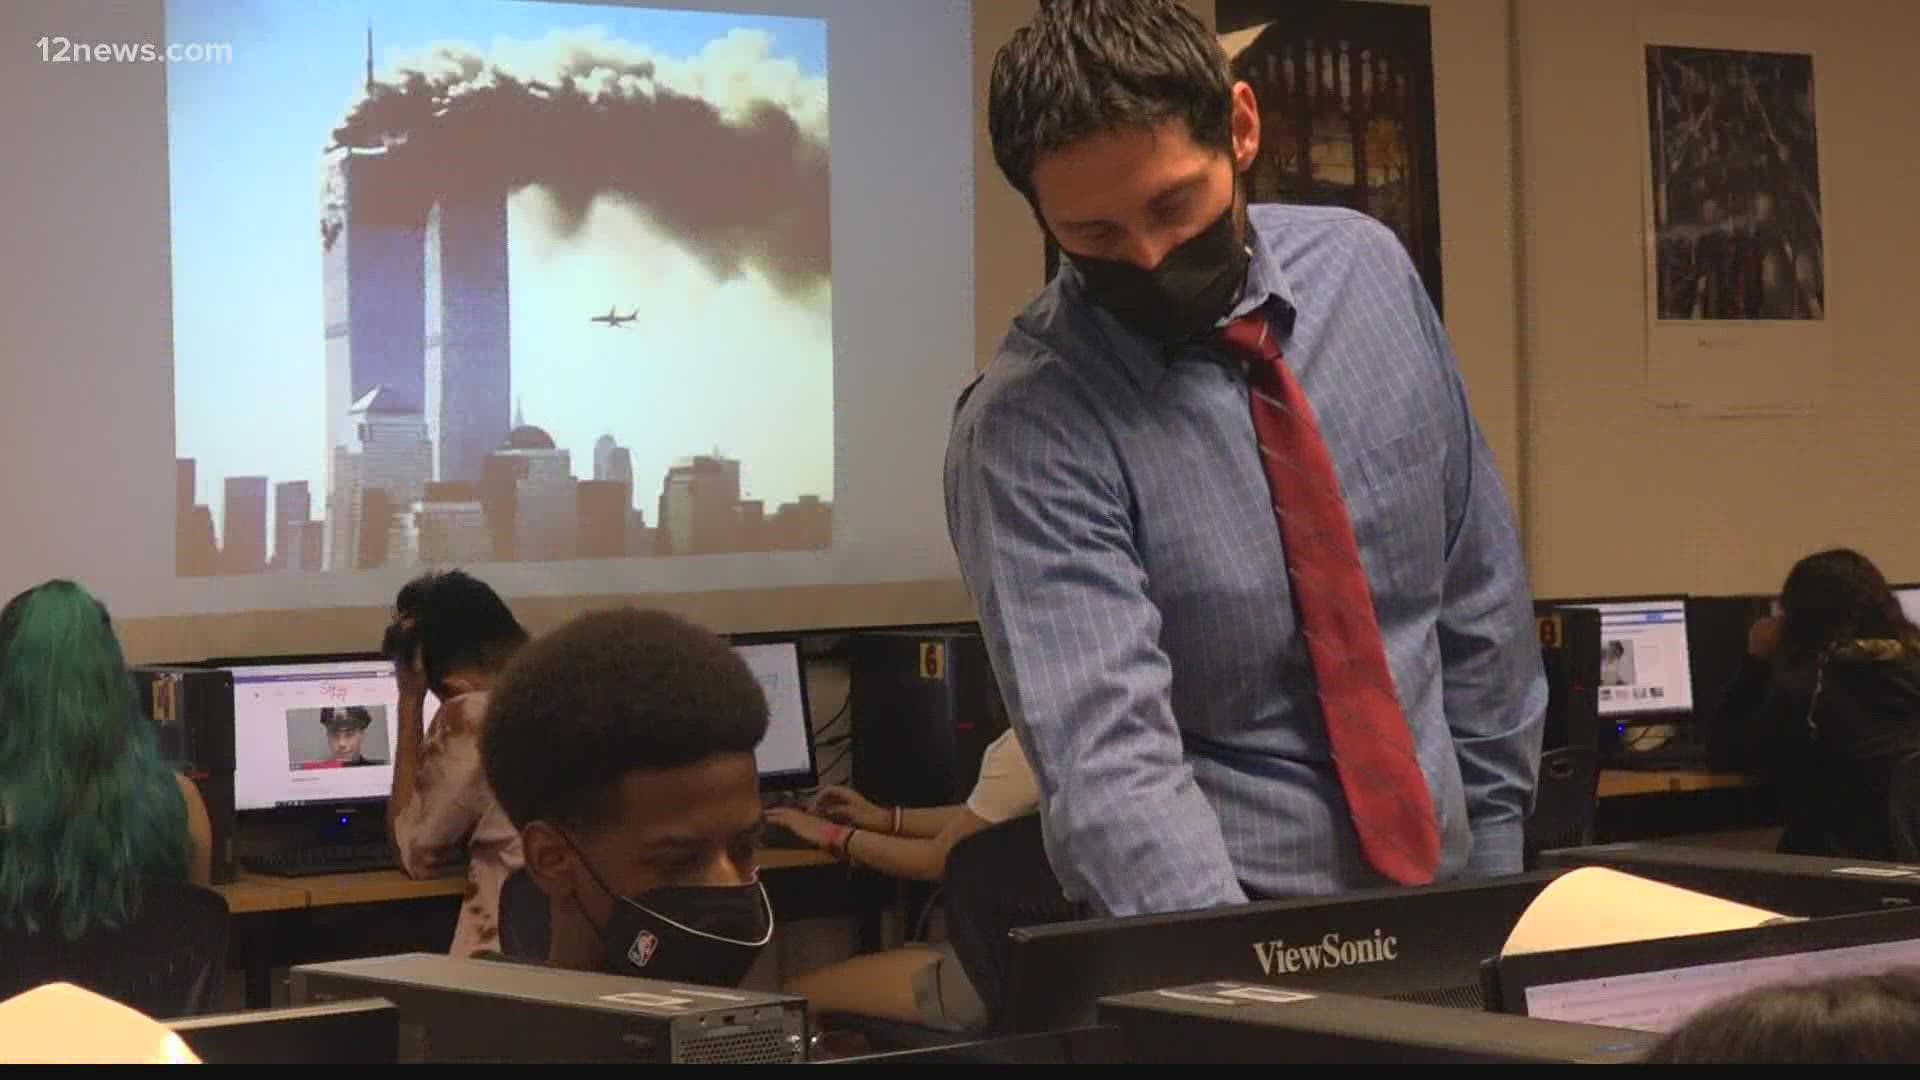 A generation of people who weren't alive on 9/11 is now in high school. The students at one Valley school are learning about that day from their textbooks.